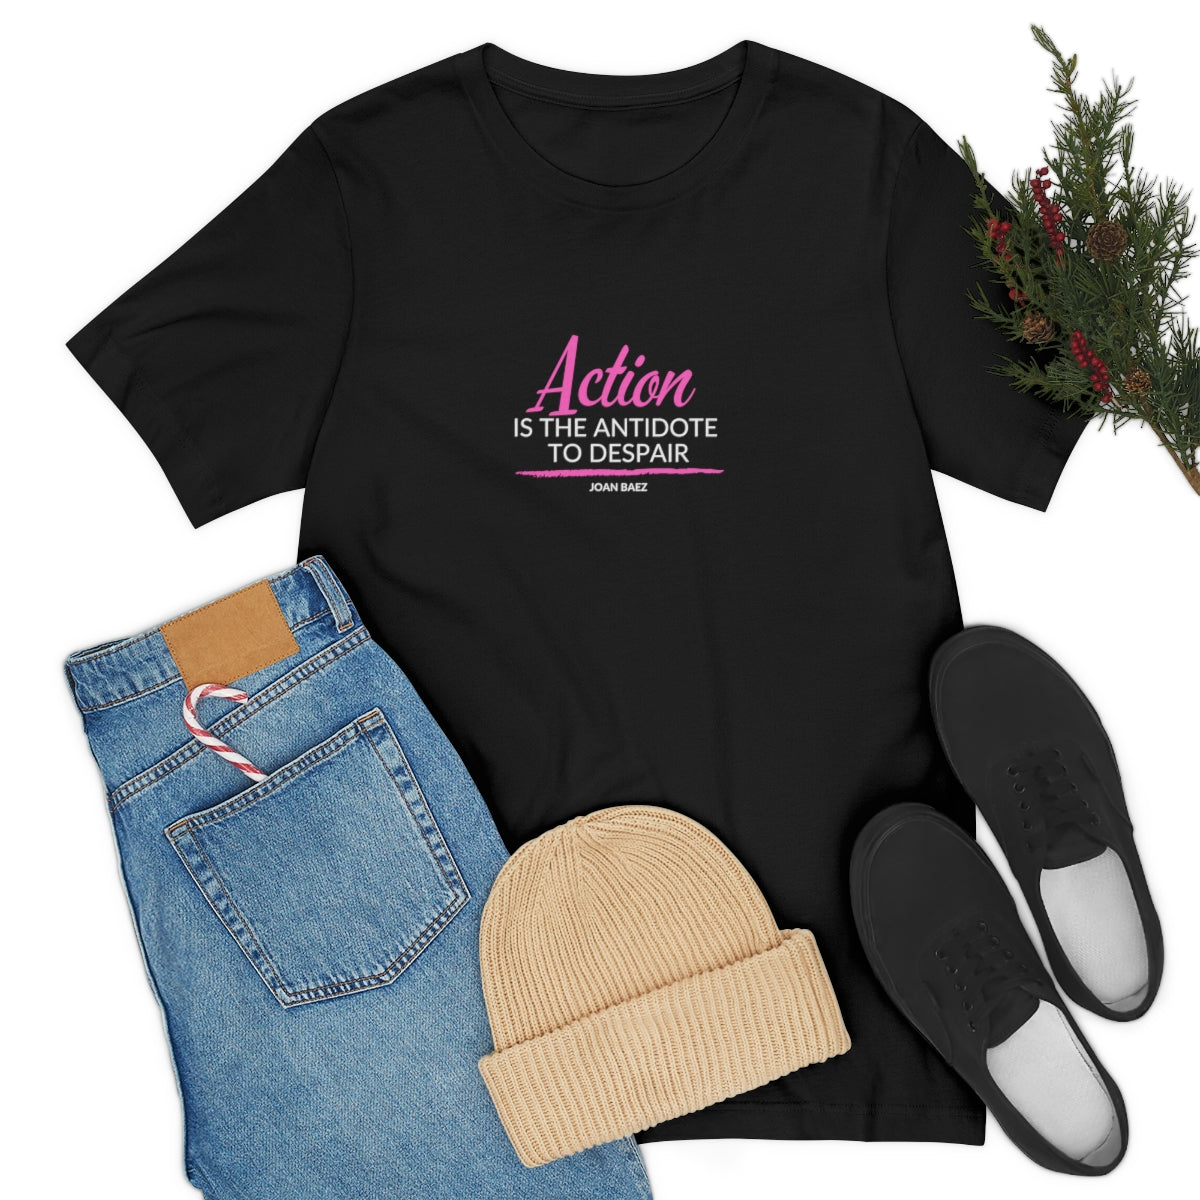 Joan Baez Motivational T Shirts, Action is the Antidote to Despair Quote Shirt, Positive Sayings, Quotes on T Shirts, Unisex